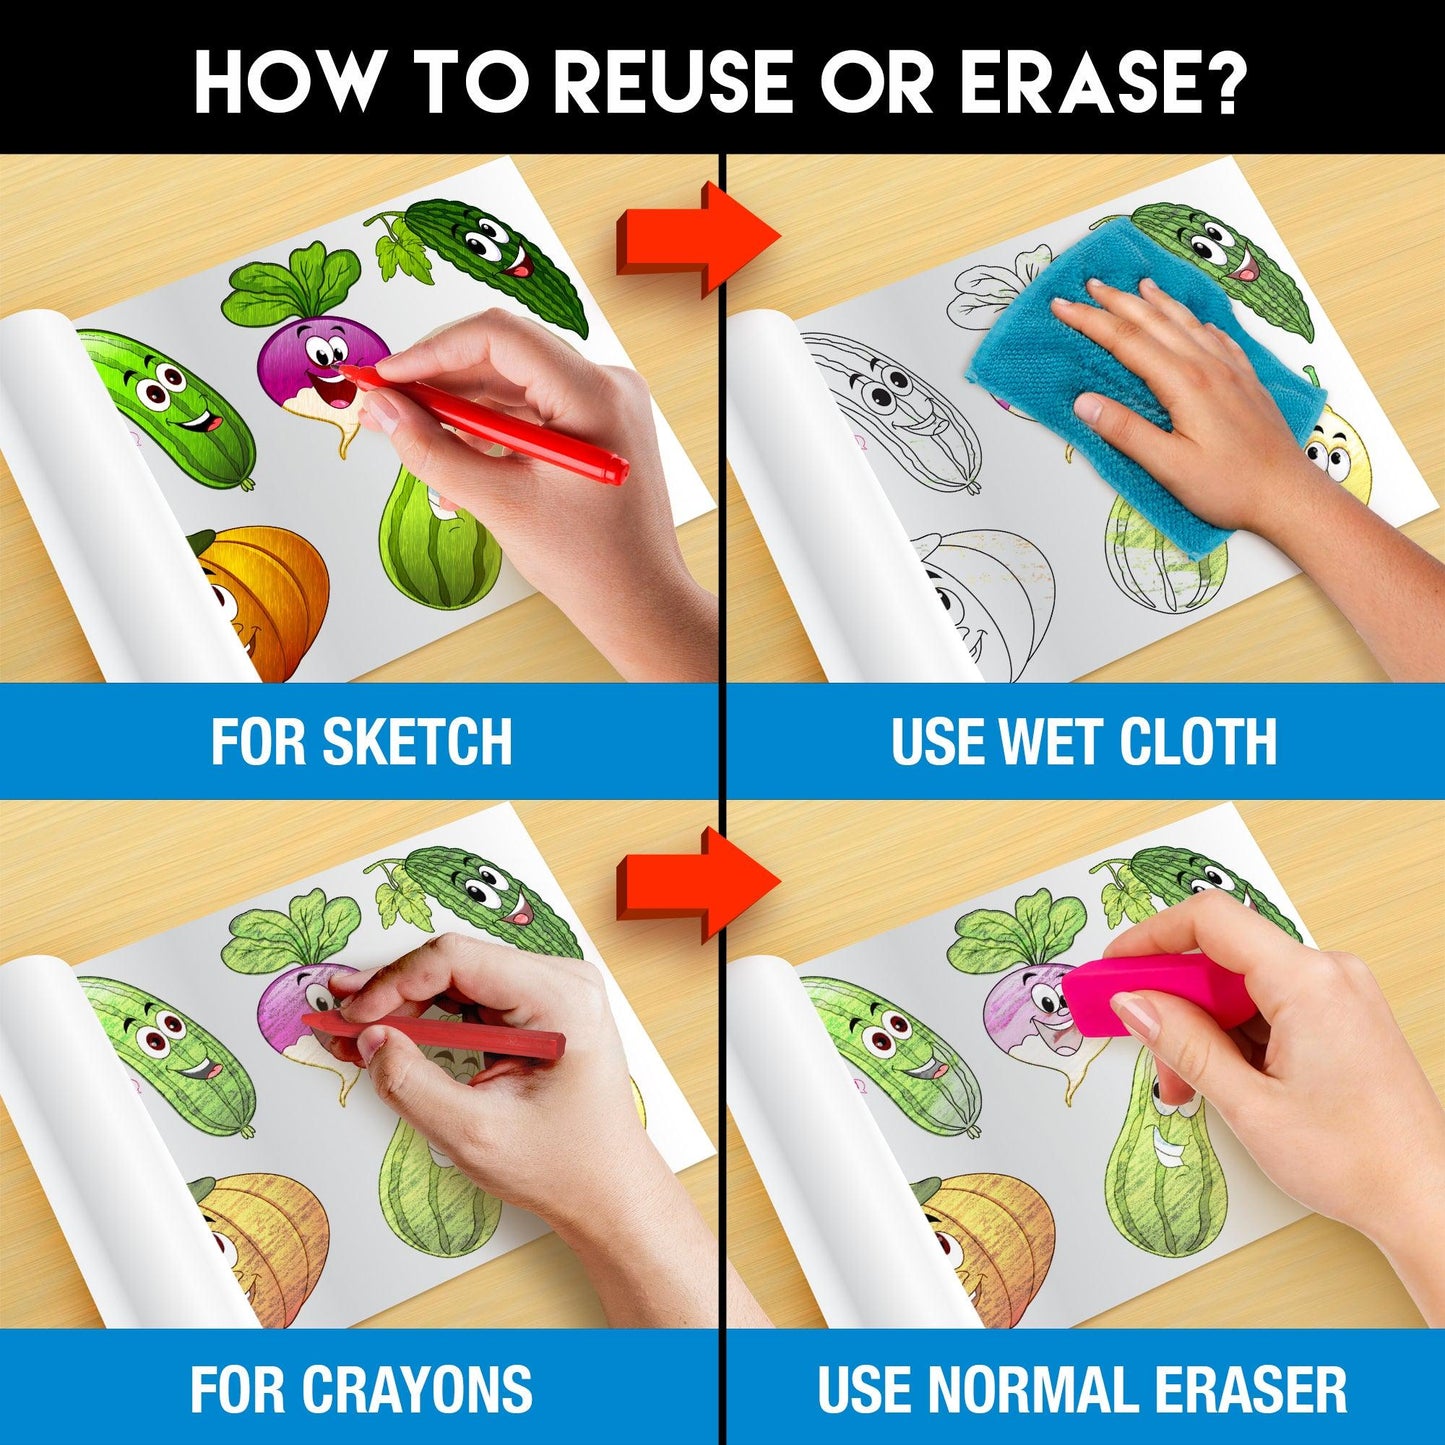 The image has a blue background with four pictures demonstrating how to reuse or erase: the first picture depicts sketching on the puzzle sheet, the second shows using a wet cloth to remove sketches, the third image displays crayons coloring on the puzzle sheet, and the fourth image illustrates erasing crayons with a regular eraser.